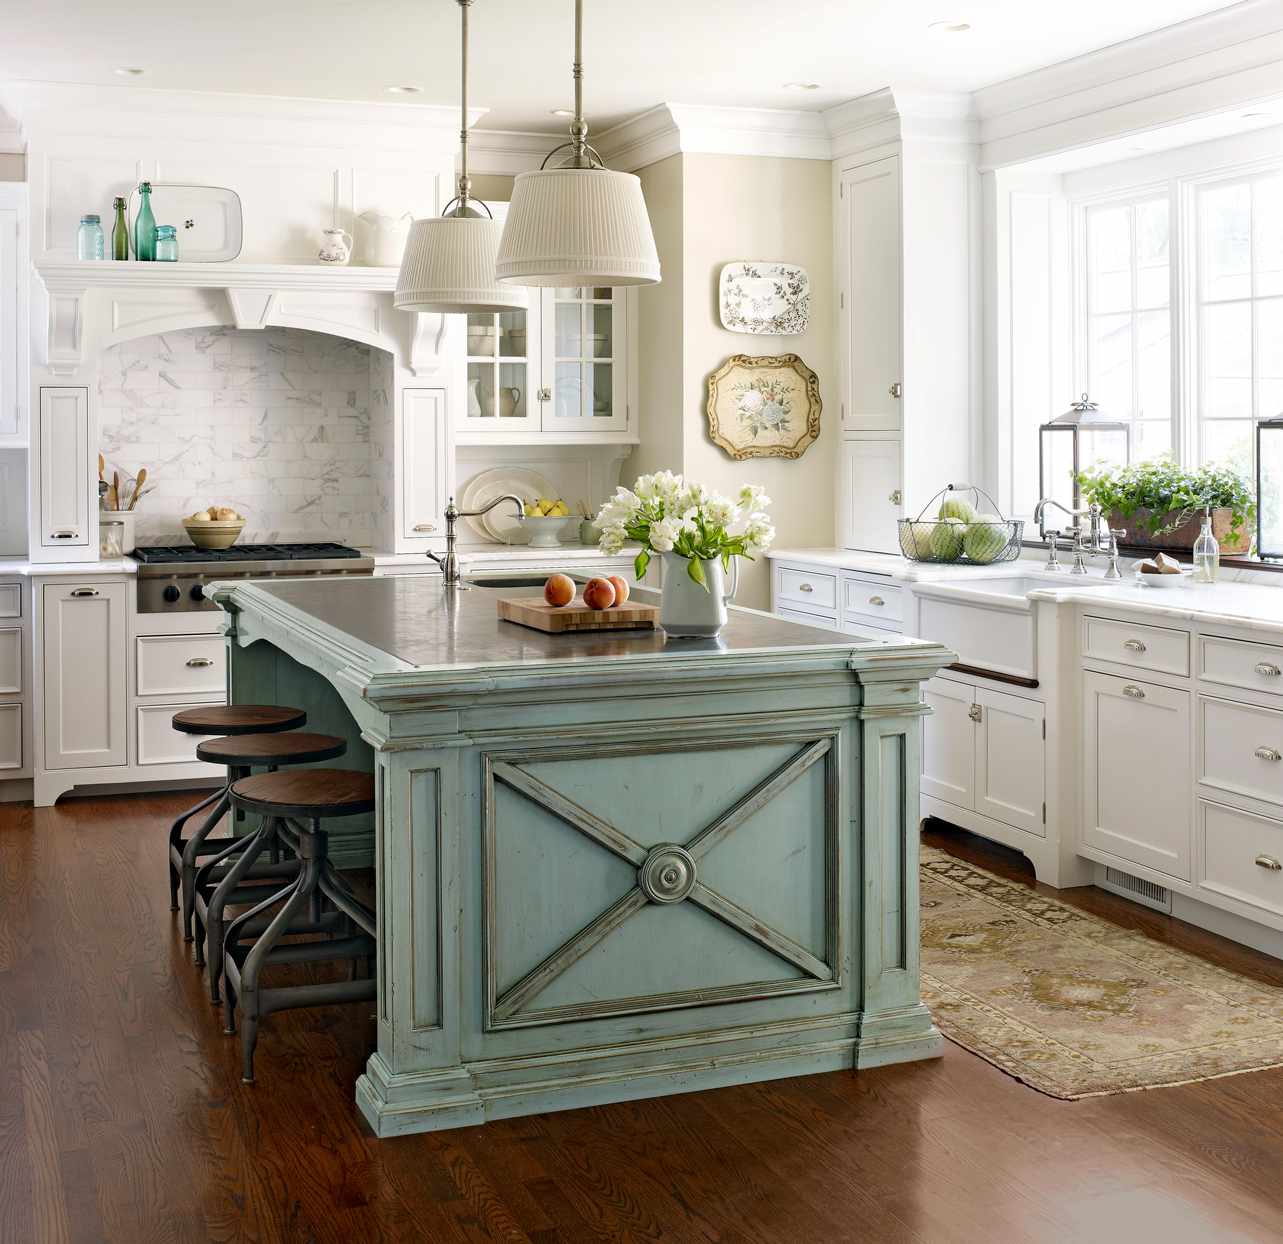 20 Contrasting Kitchen Island Ideas for a Stand Out Space   Better ...